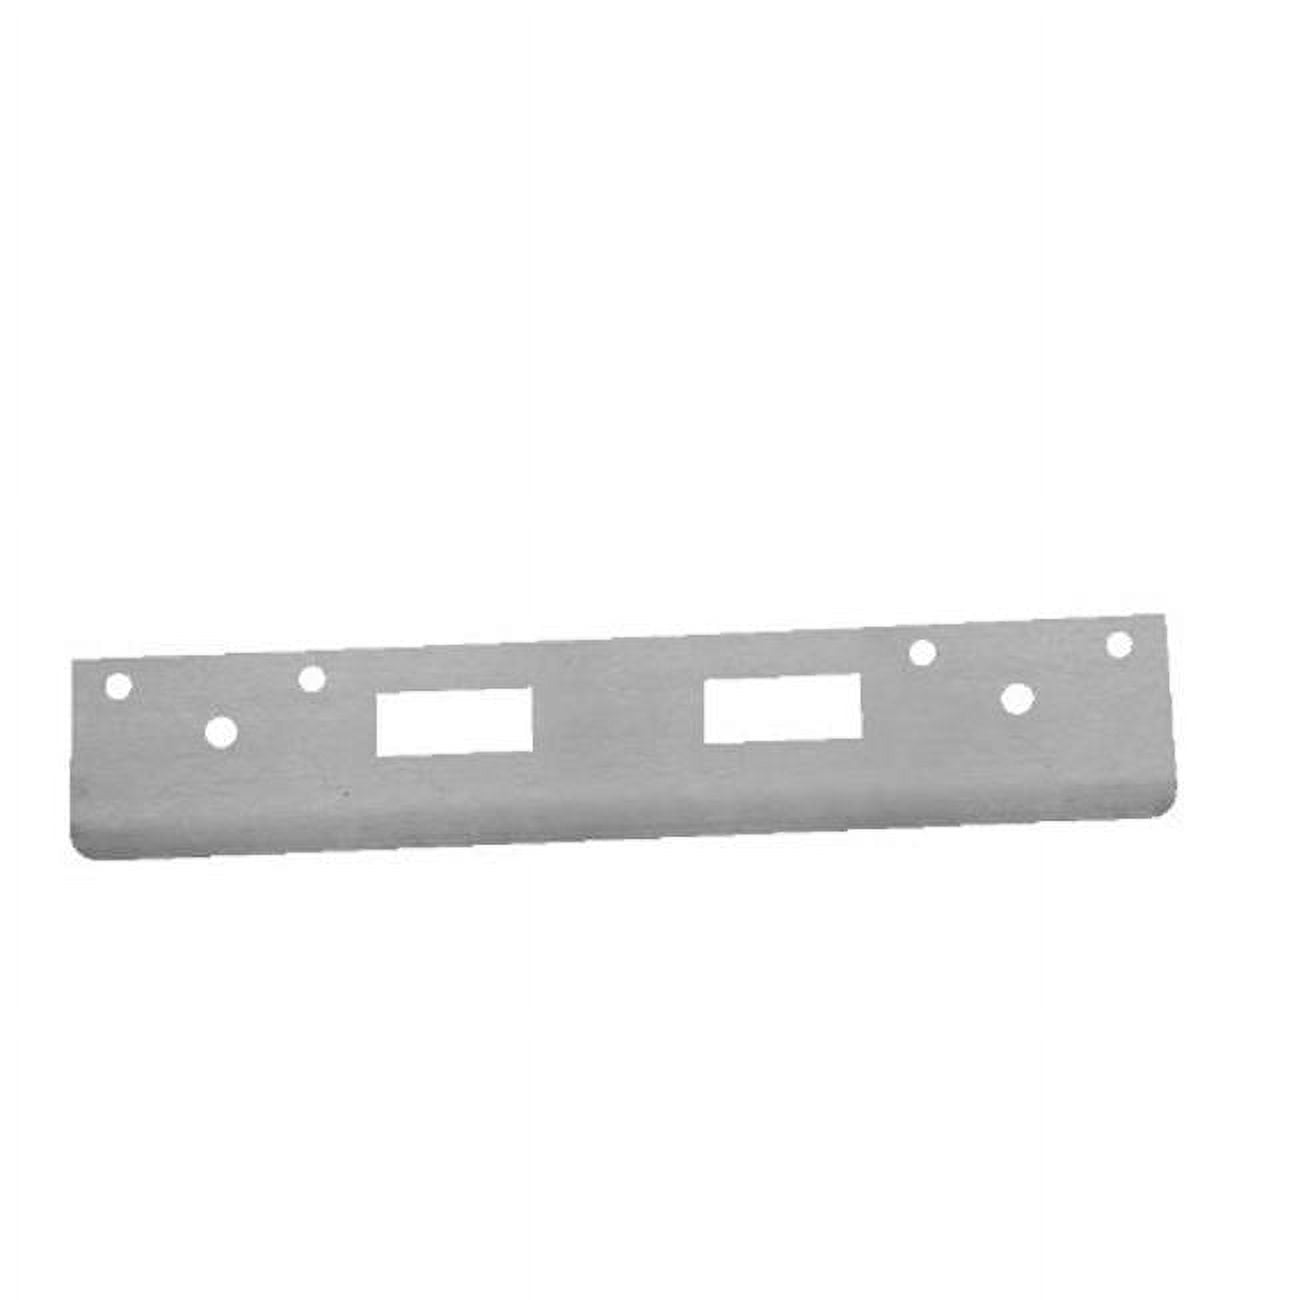 Fl 212n4-sl 12 In. Full Lip High Security Strike With 4 In. Ctc Latch Holes, Silver Coated